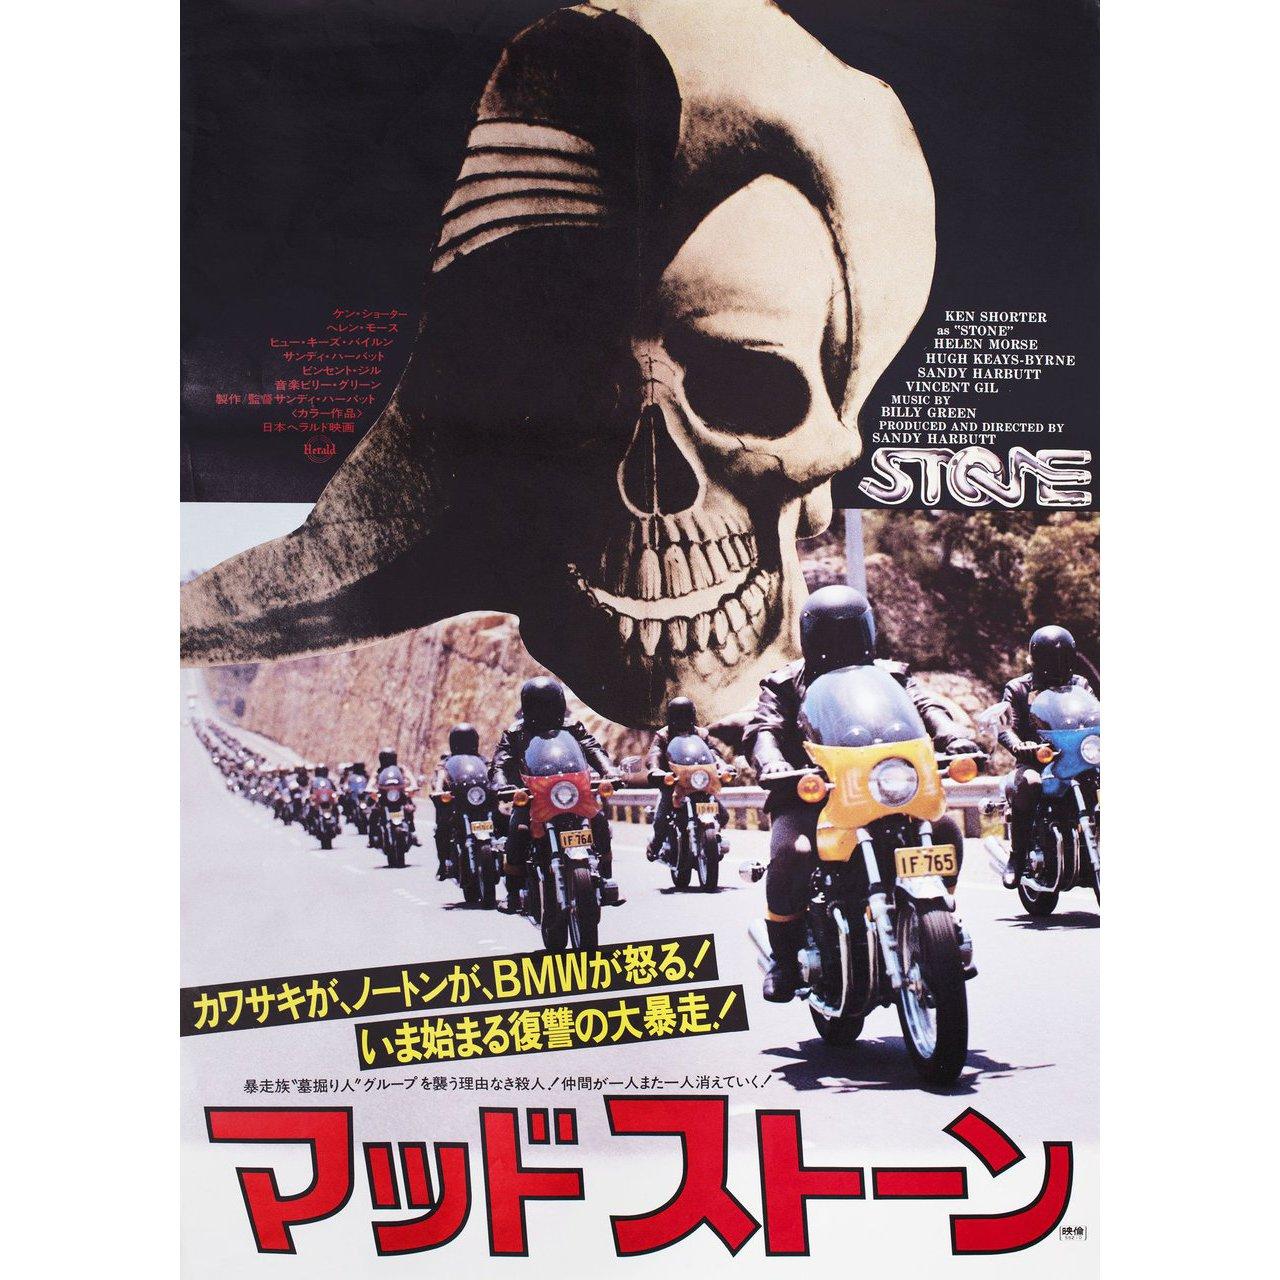 Original 1974 Japanese B2 poster for the film Stone directed by Sandy Harbutt with Deryck Barnes / Sandy Harbutt / Hugh Keays-Byrne / Lex Mitchell. Very good-fine condition, rolled. Please note: the size is stated in inches and the actual size can